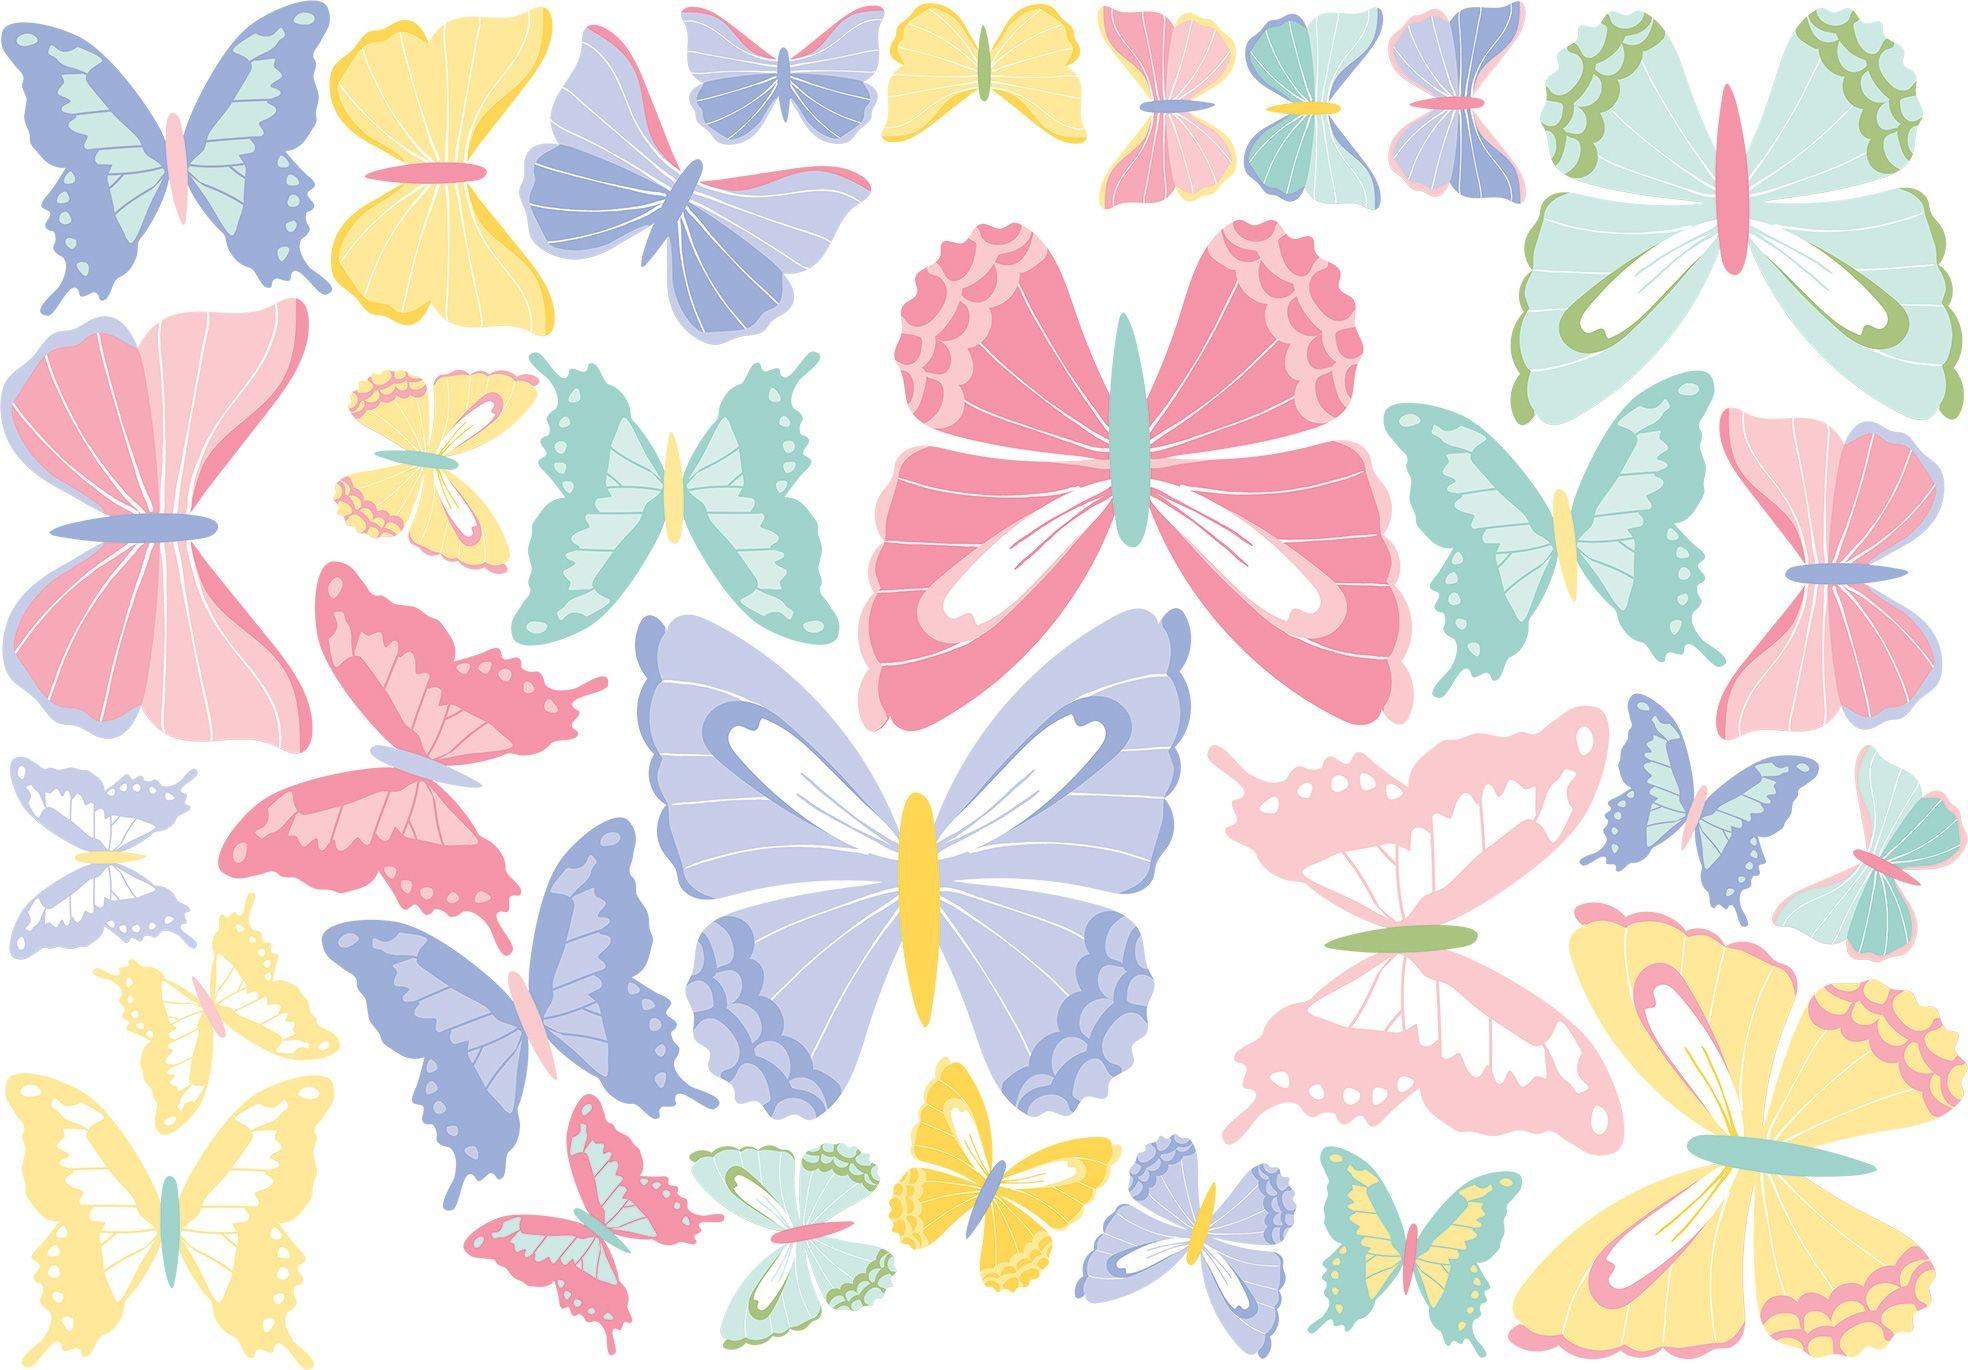 Pastel Butterfly Cutouts 30ct